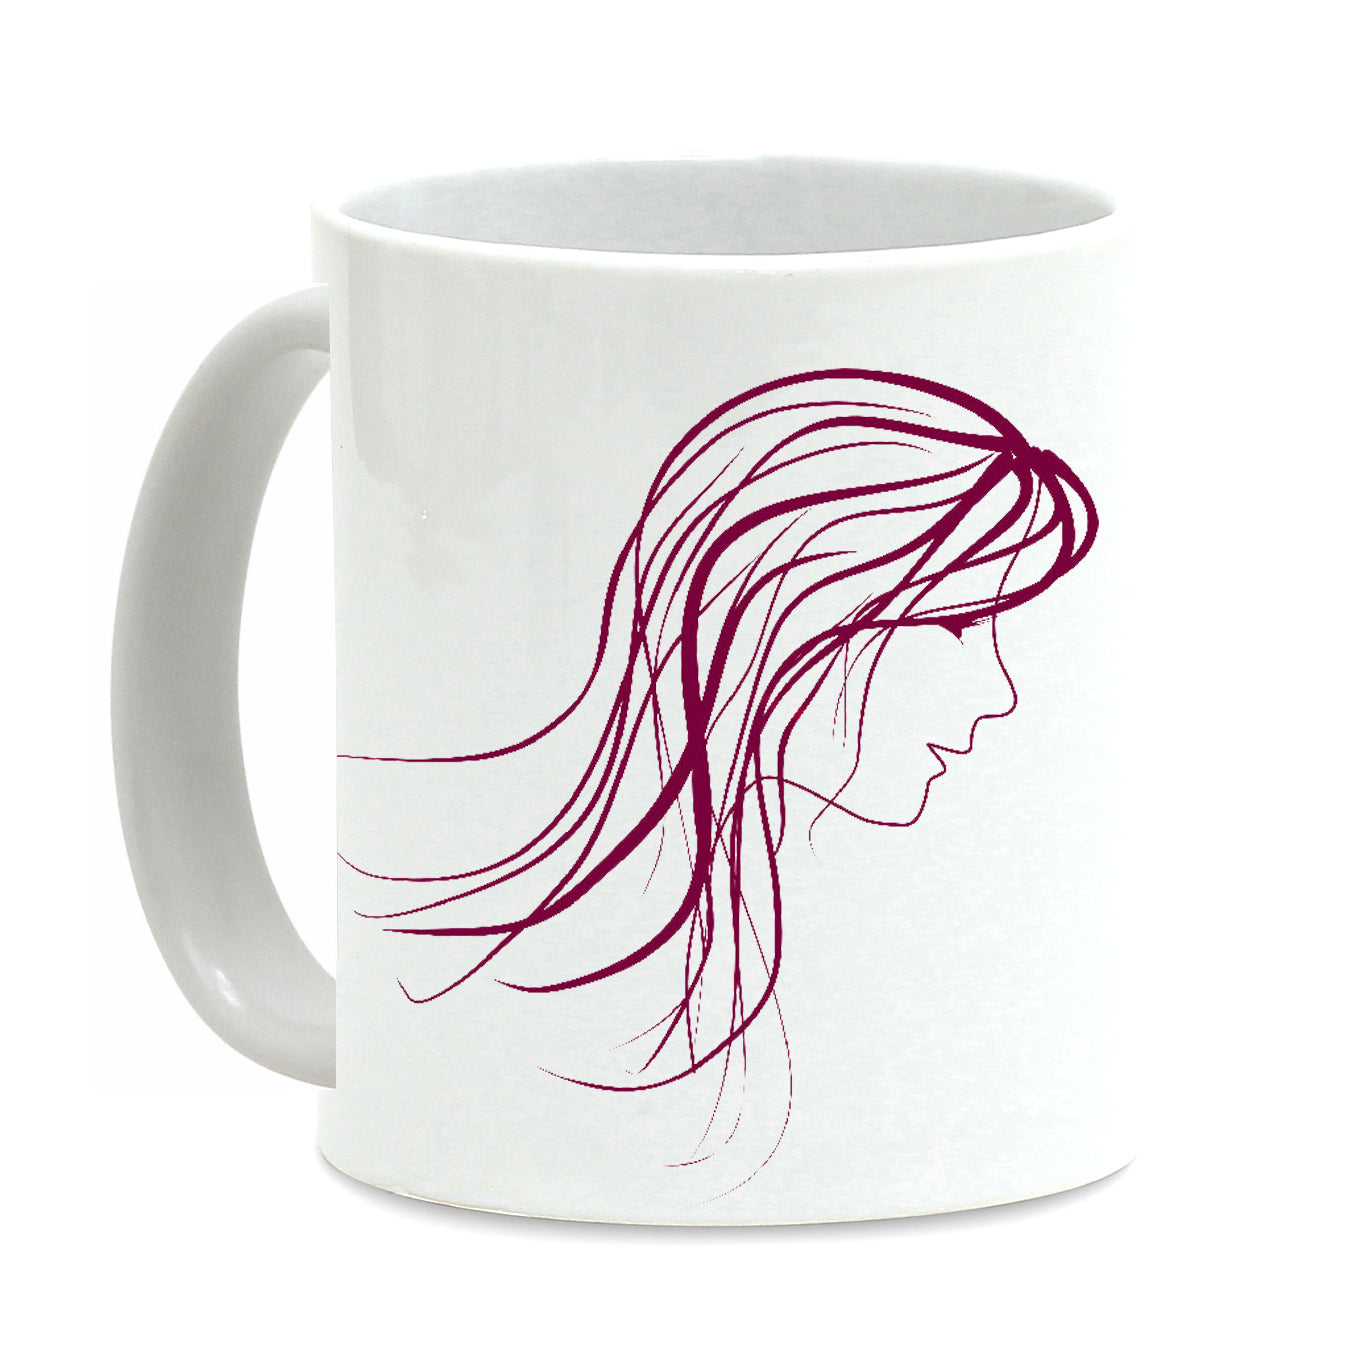 SUBLIMART: Bella Donna Lineart - Mug featuring styled hand drawn trendy women profiles drawings.